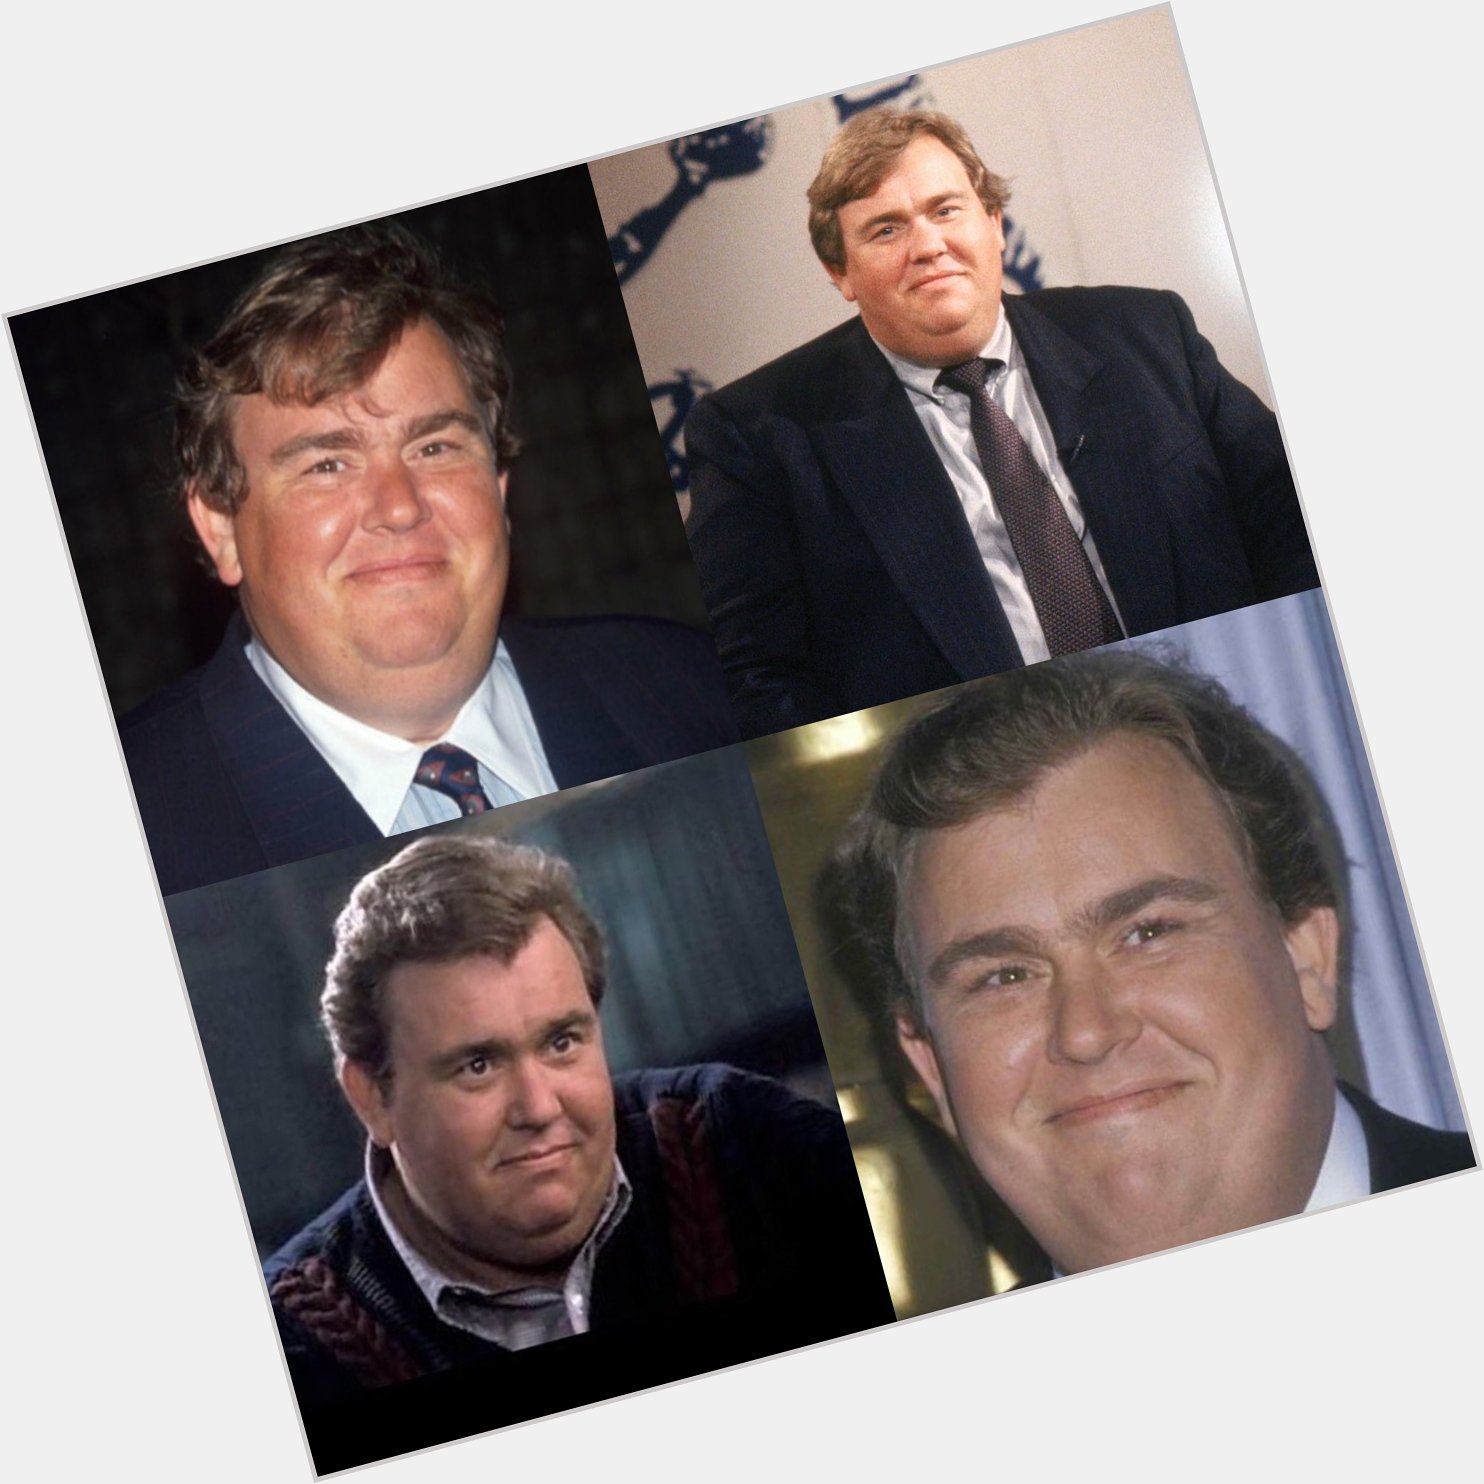 Happy 70 birthday to John Candy up in heaven. May he Rest In Peace.  